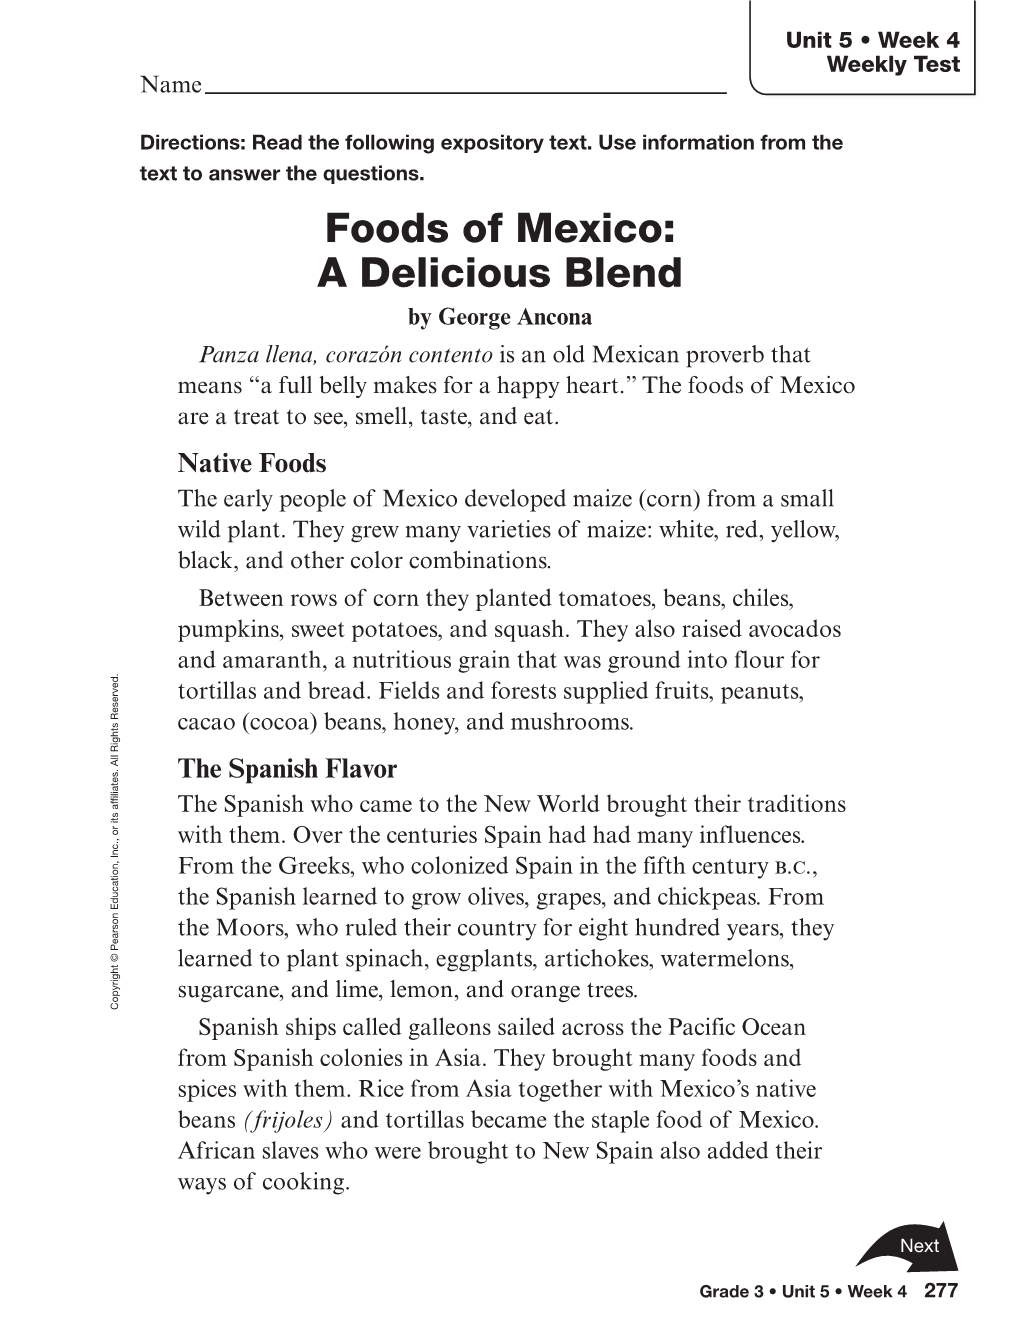 Foods of Mexico: a Delicious Blend